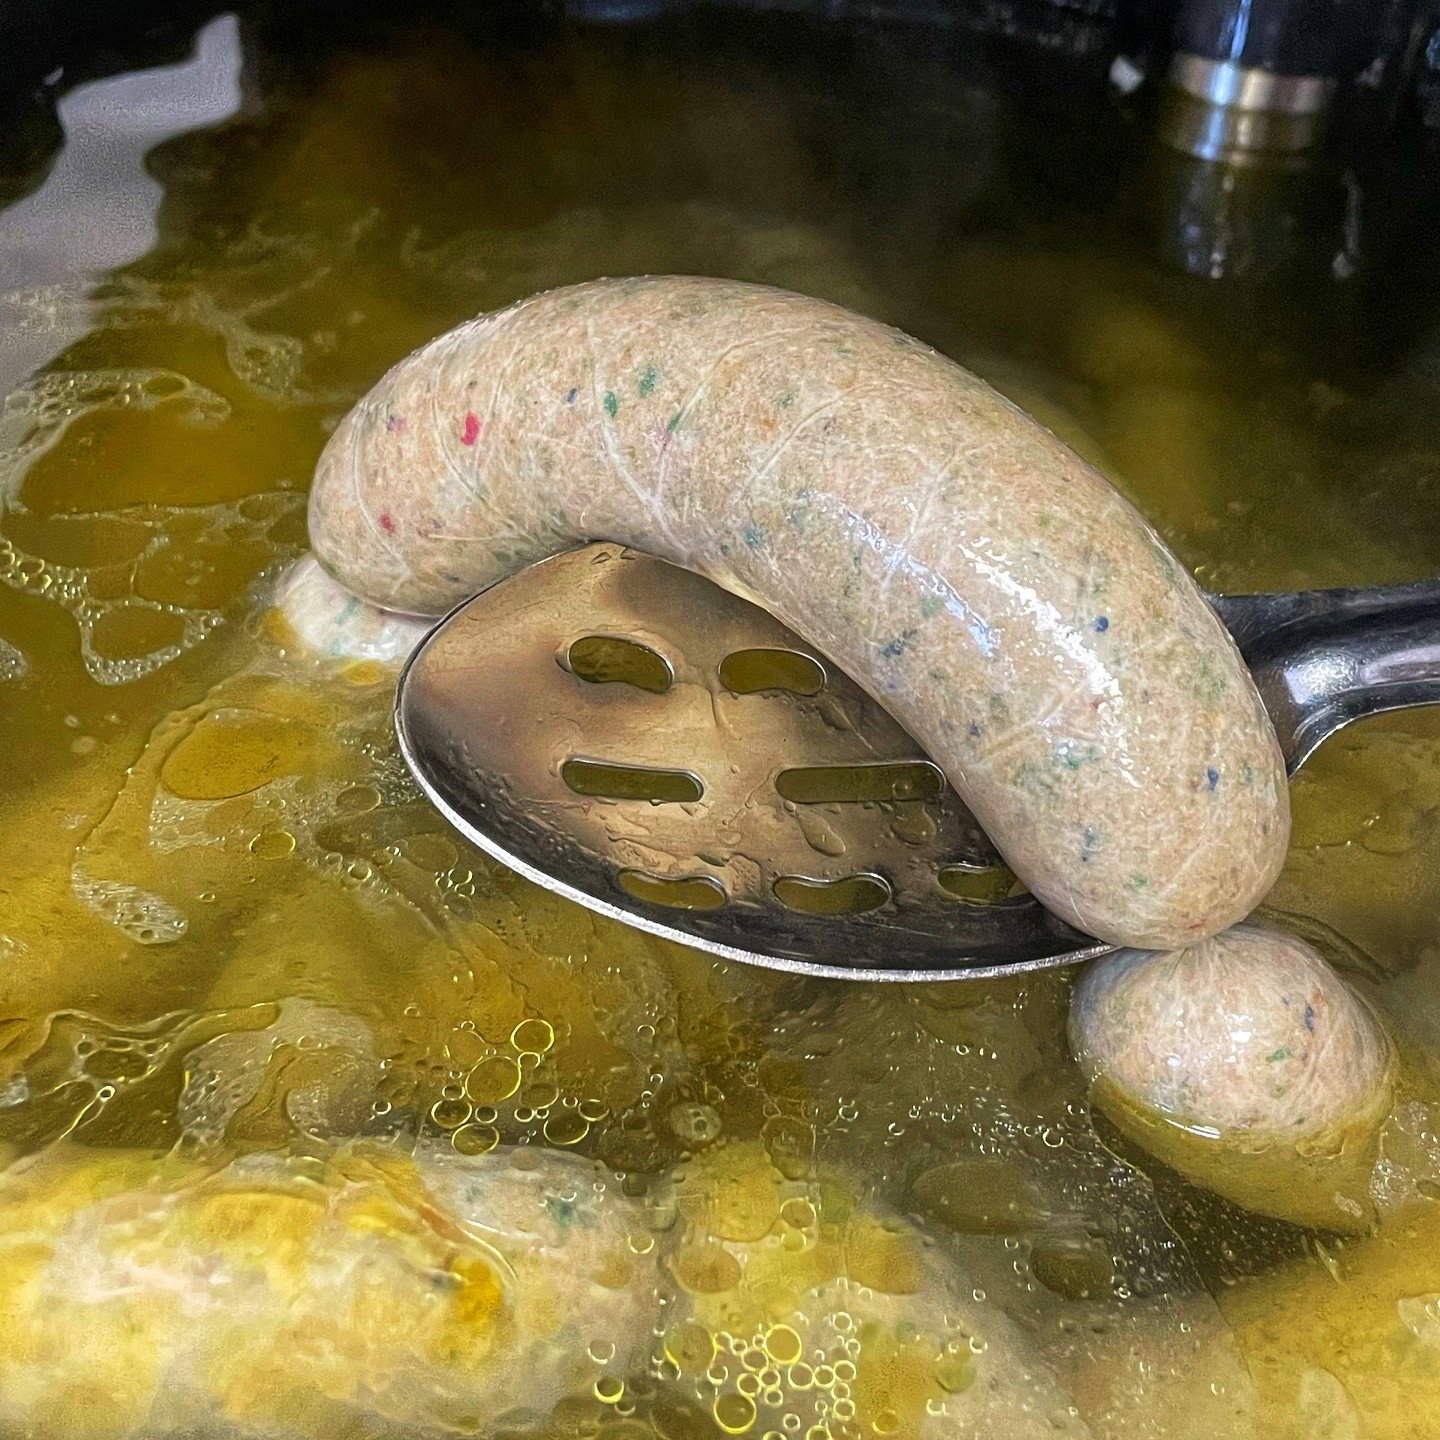 Hot boudin! 

If you&rsquo;ve never had this Louisiana masterpiece, you should get some while they&rsquo;re fresh. Rice, pork and seasonings make a super tasty stuffing for these. 

Not for grilling- you steam or heat them up and eat the filling righ